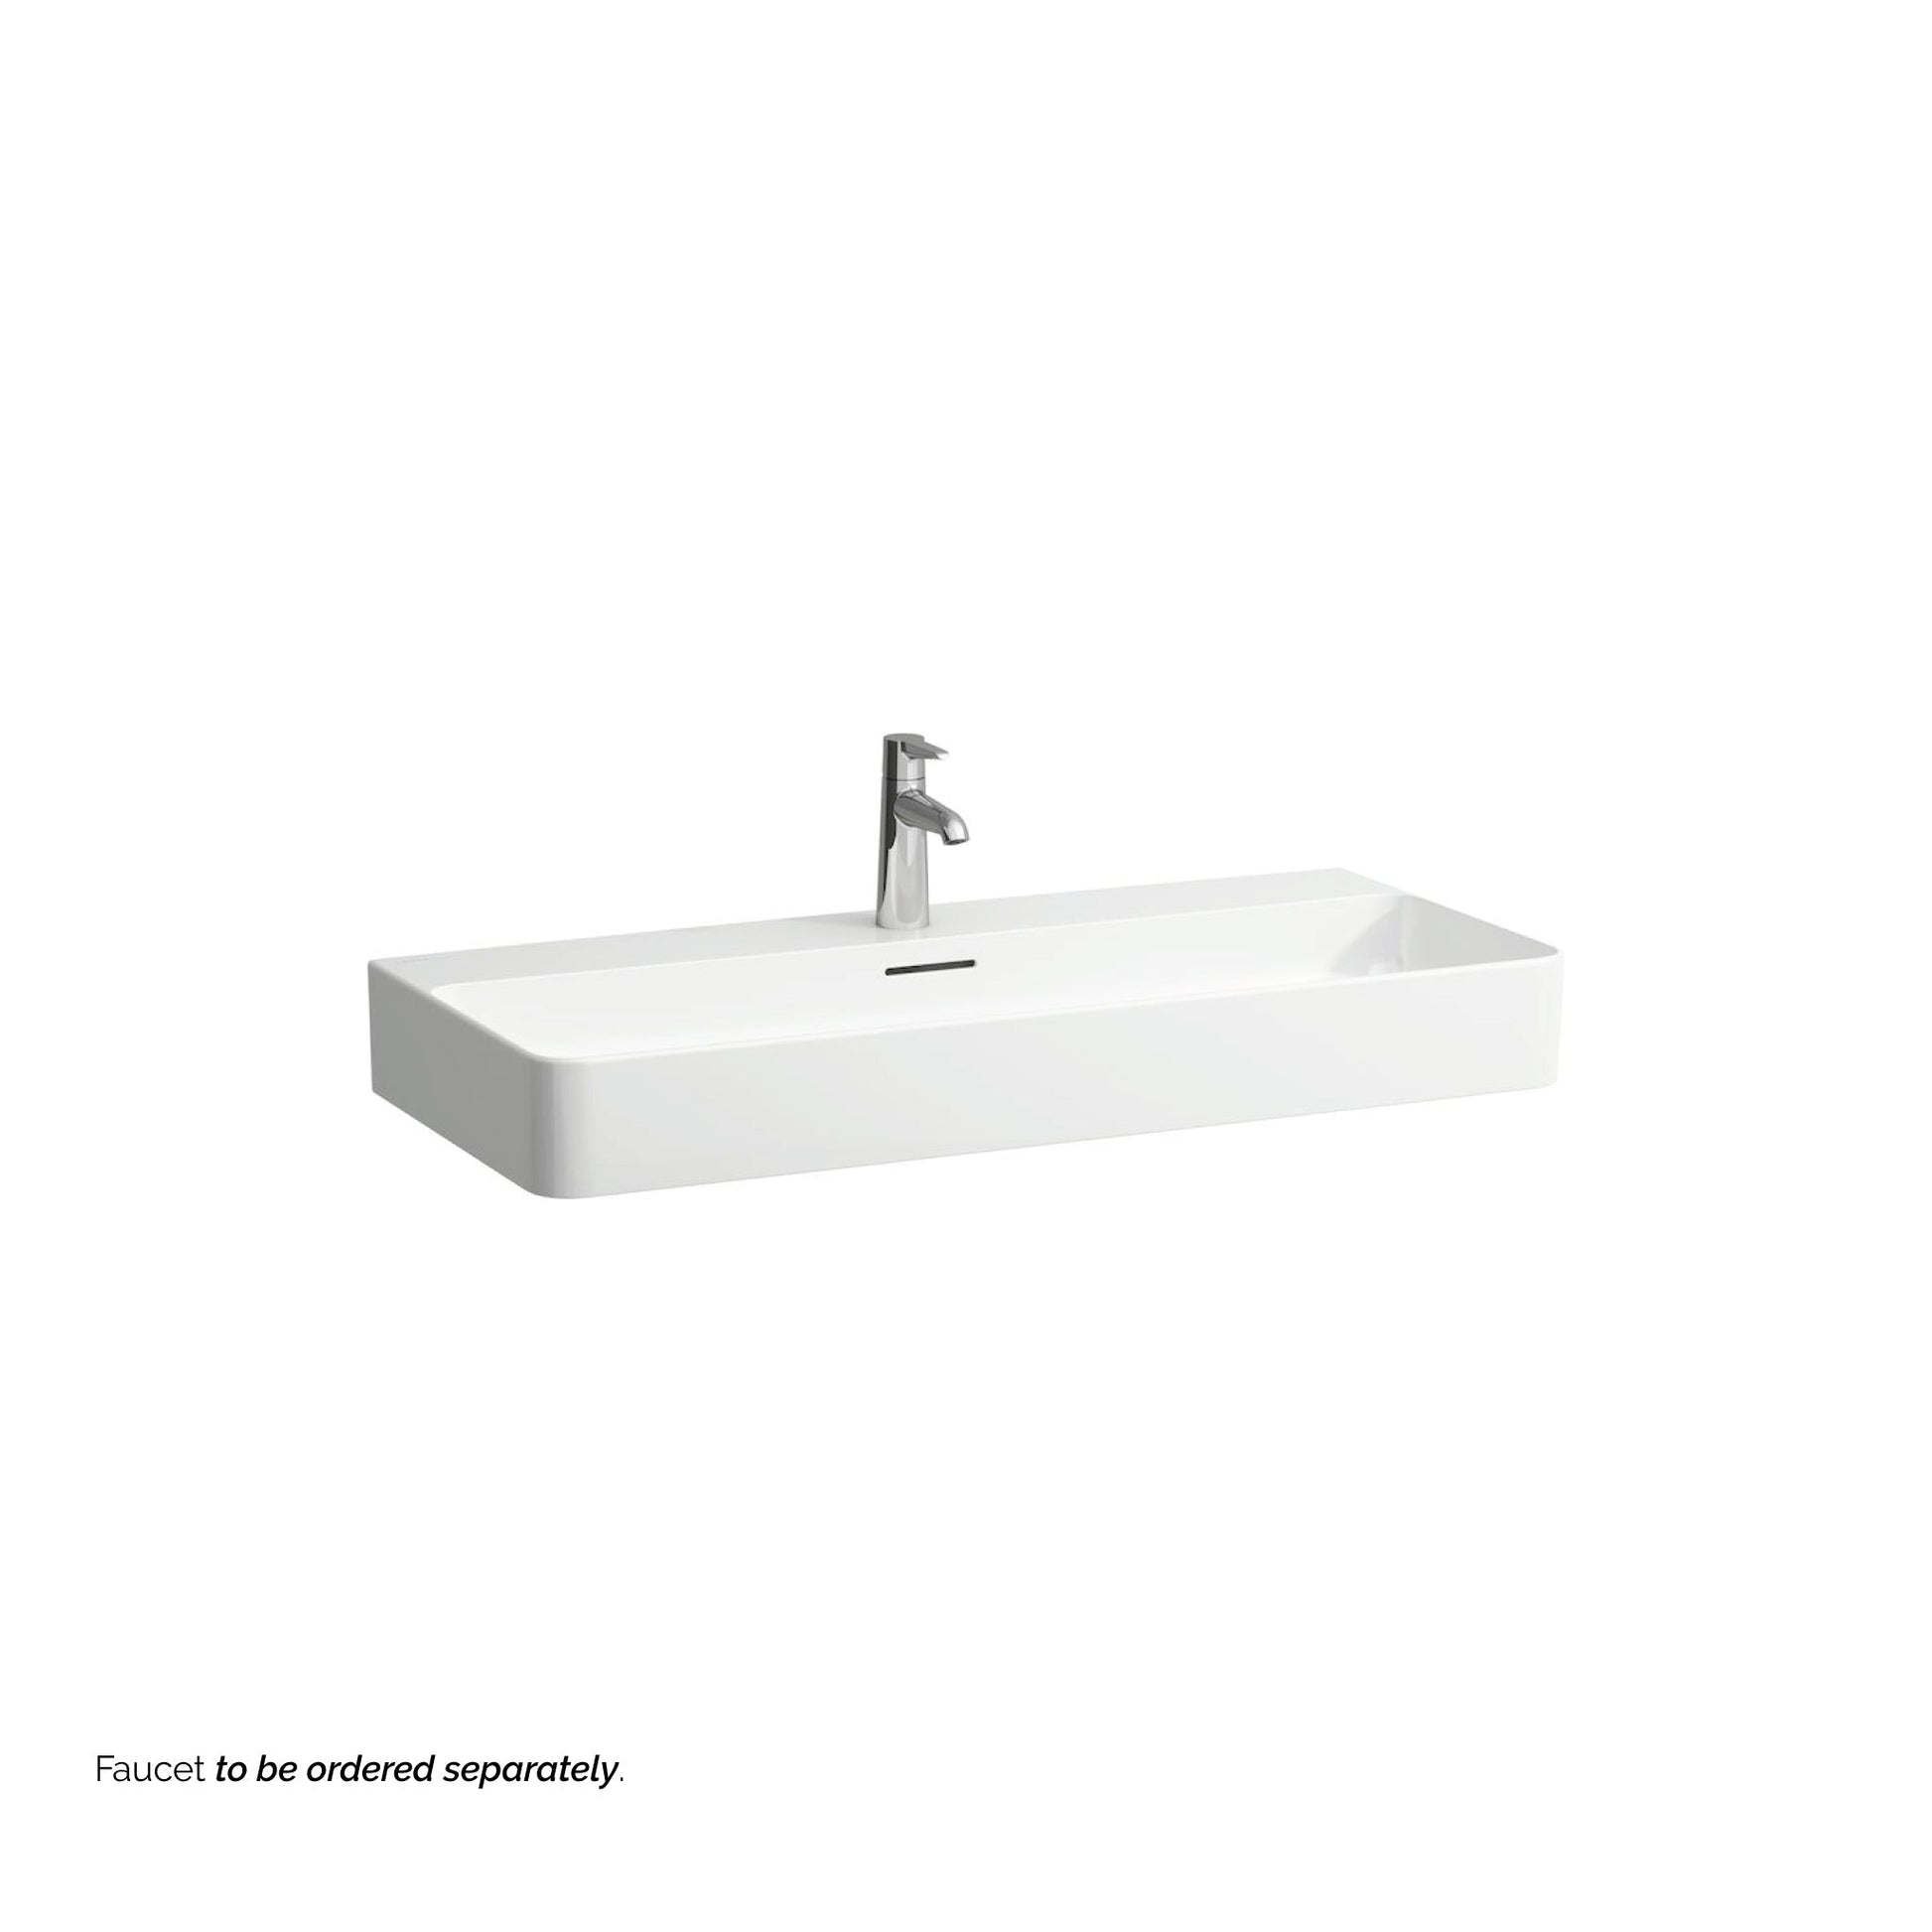 Laufen Val 37" x 17" White Ceramic Wall-Mounted Bathroom Sink With Faucet Hole